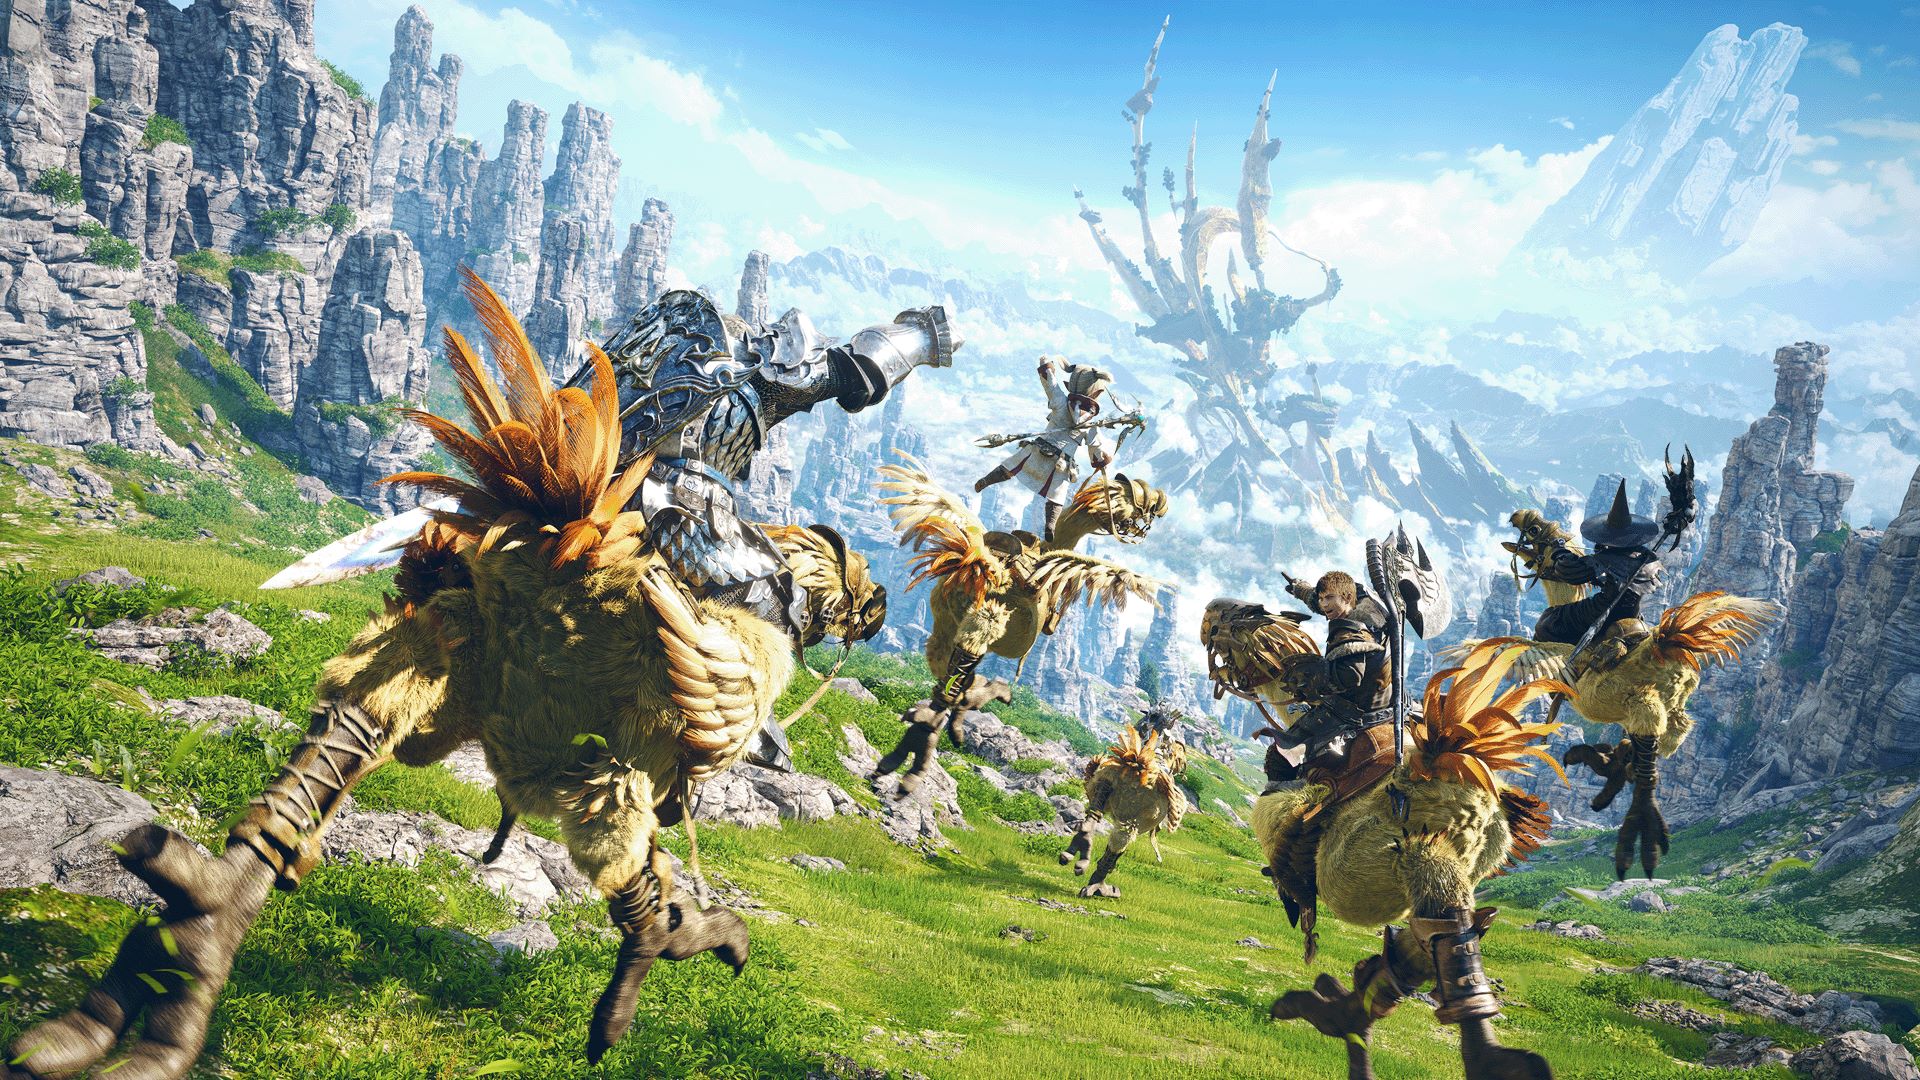 Final Fantasy XIV Online Open Beta Now Available on Xbox Series X